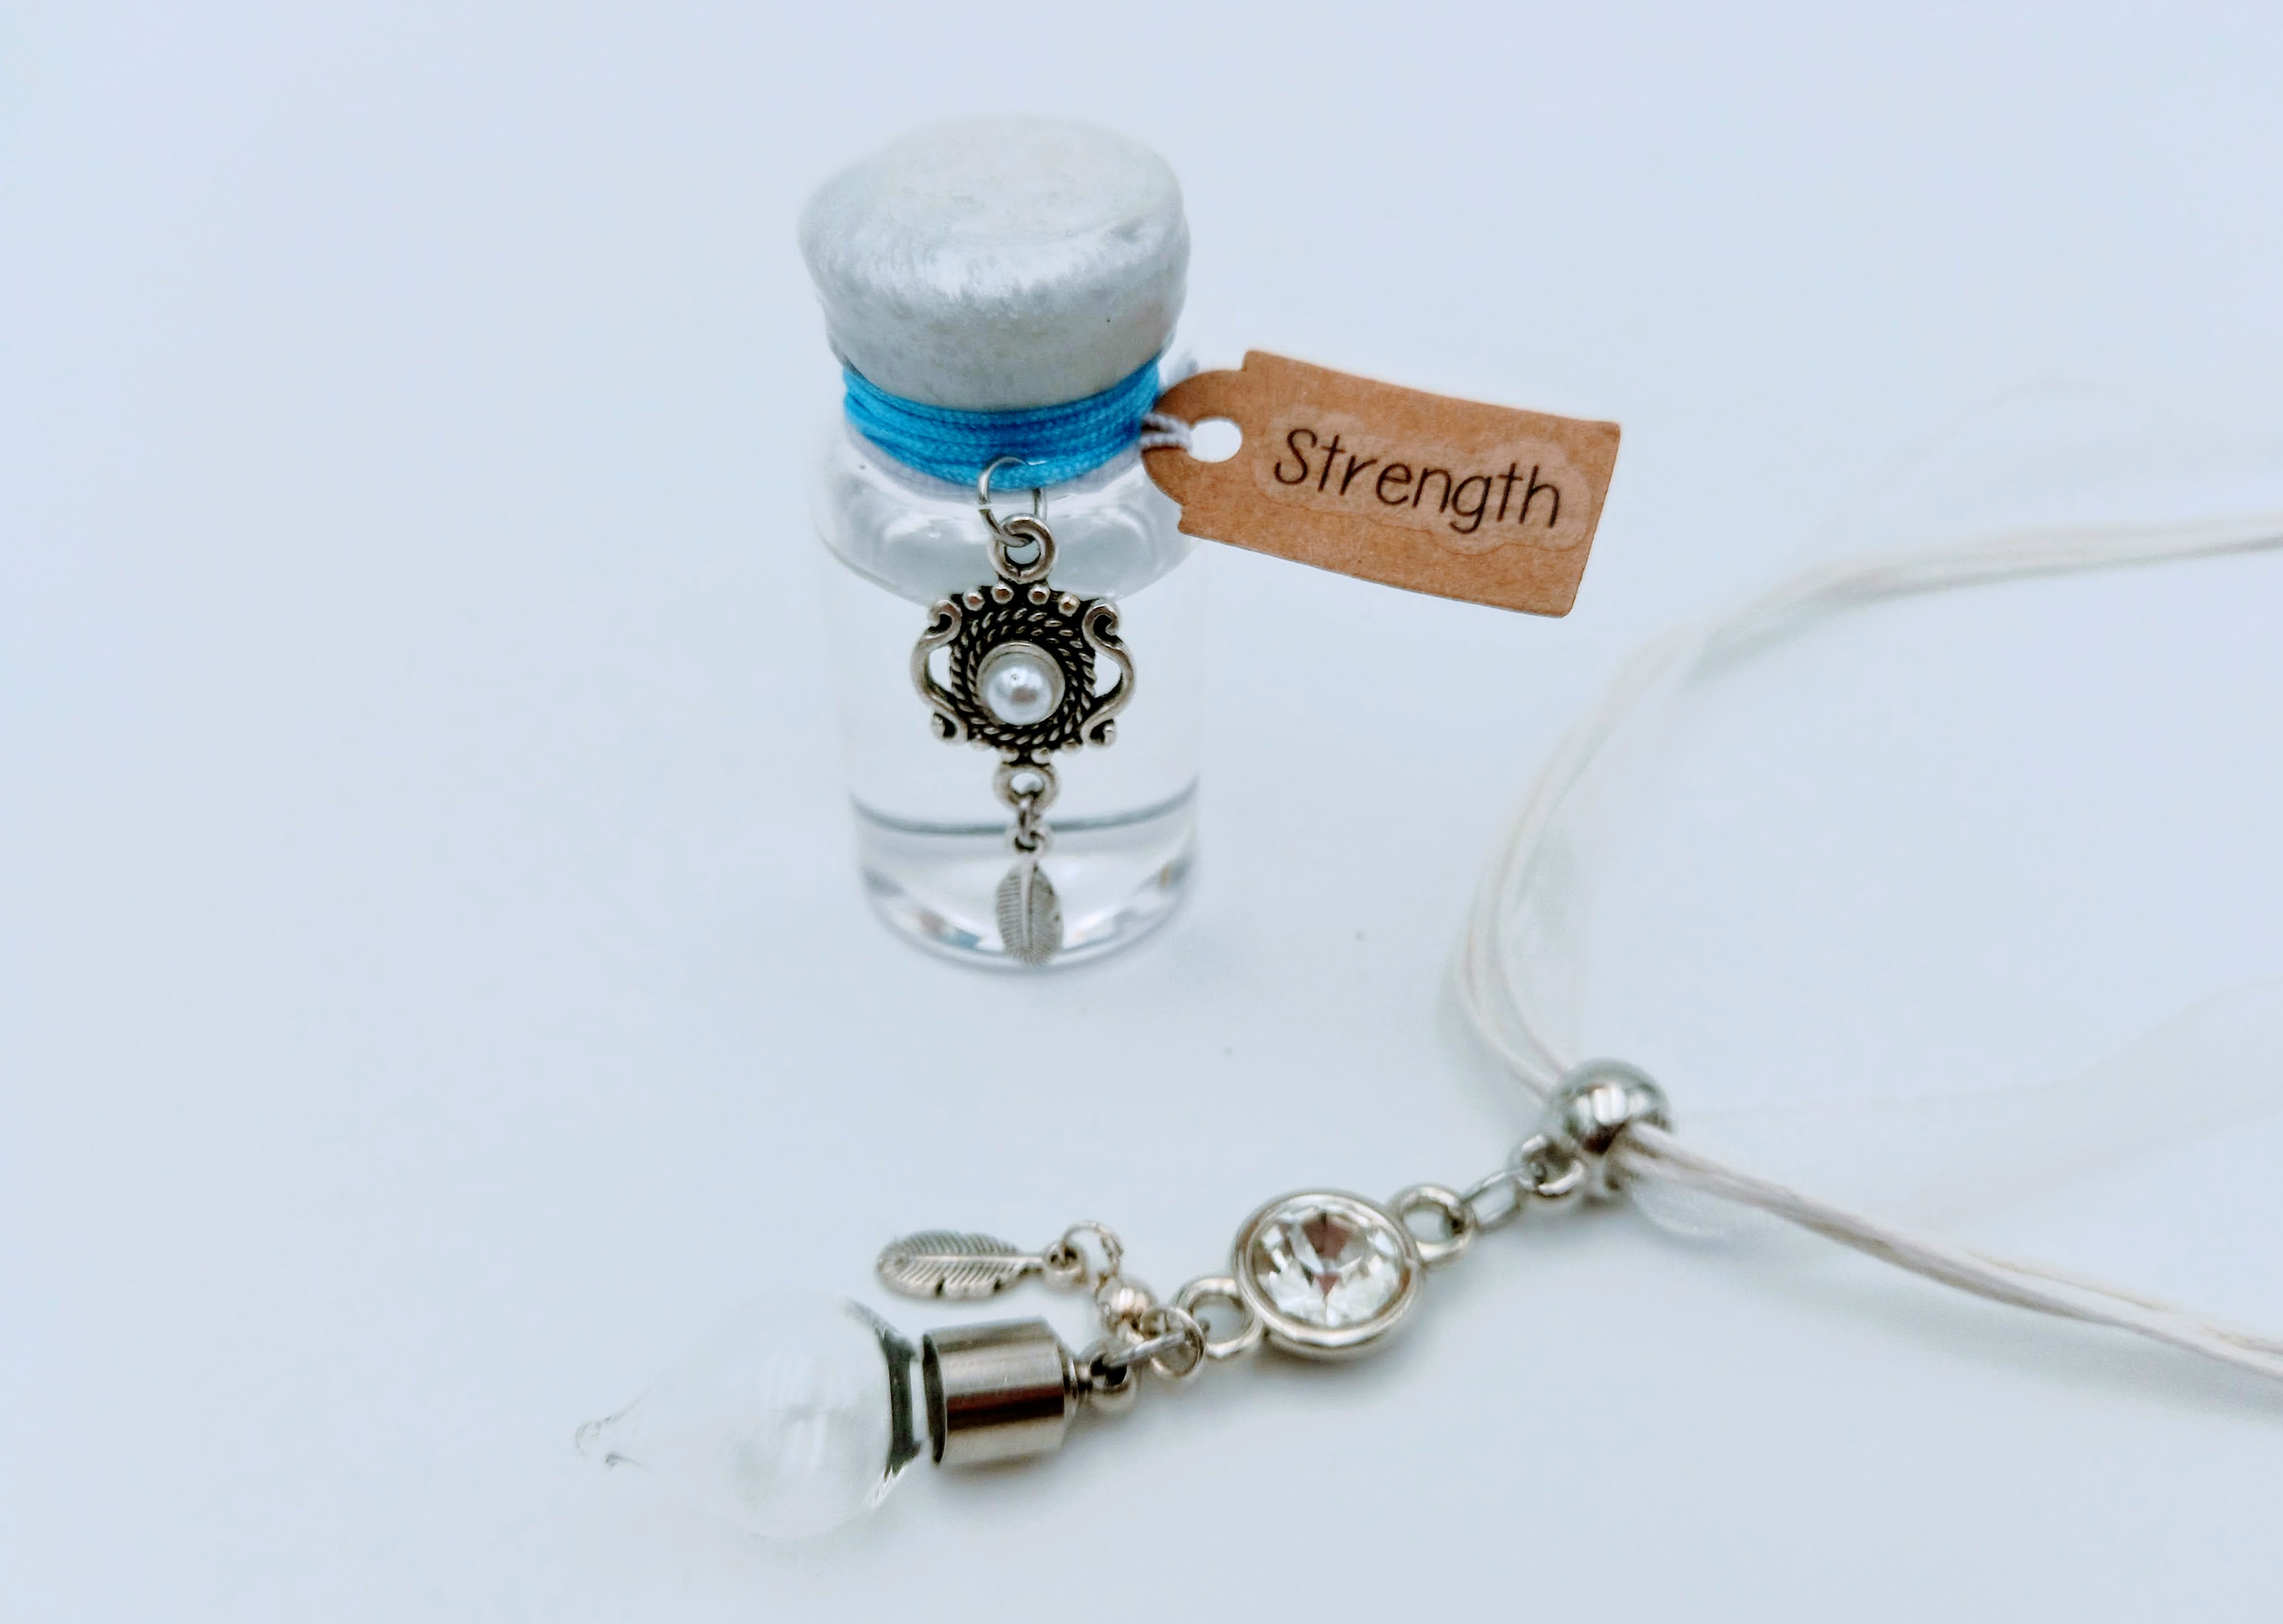 * Protection and Strength - Charmed Pendant filled with St.Brigid Well Water from an Irish Holy Well